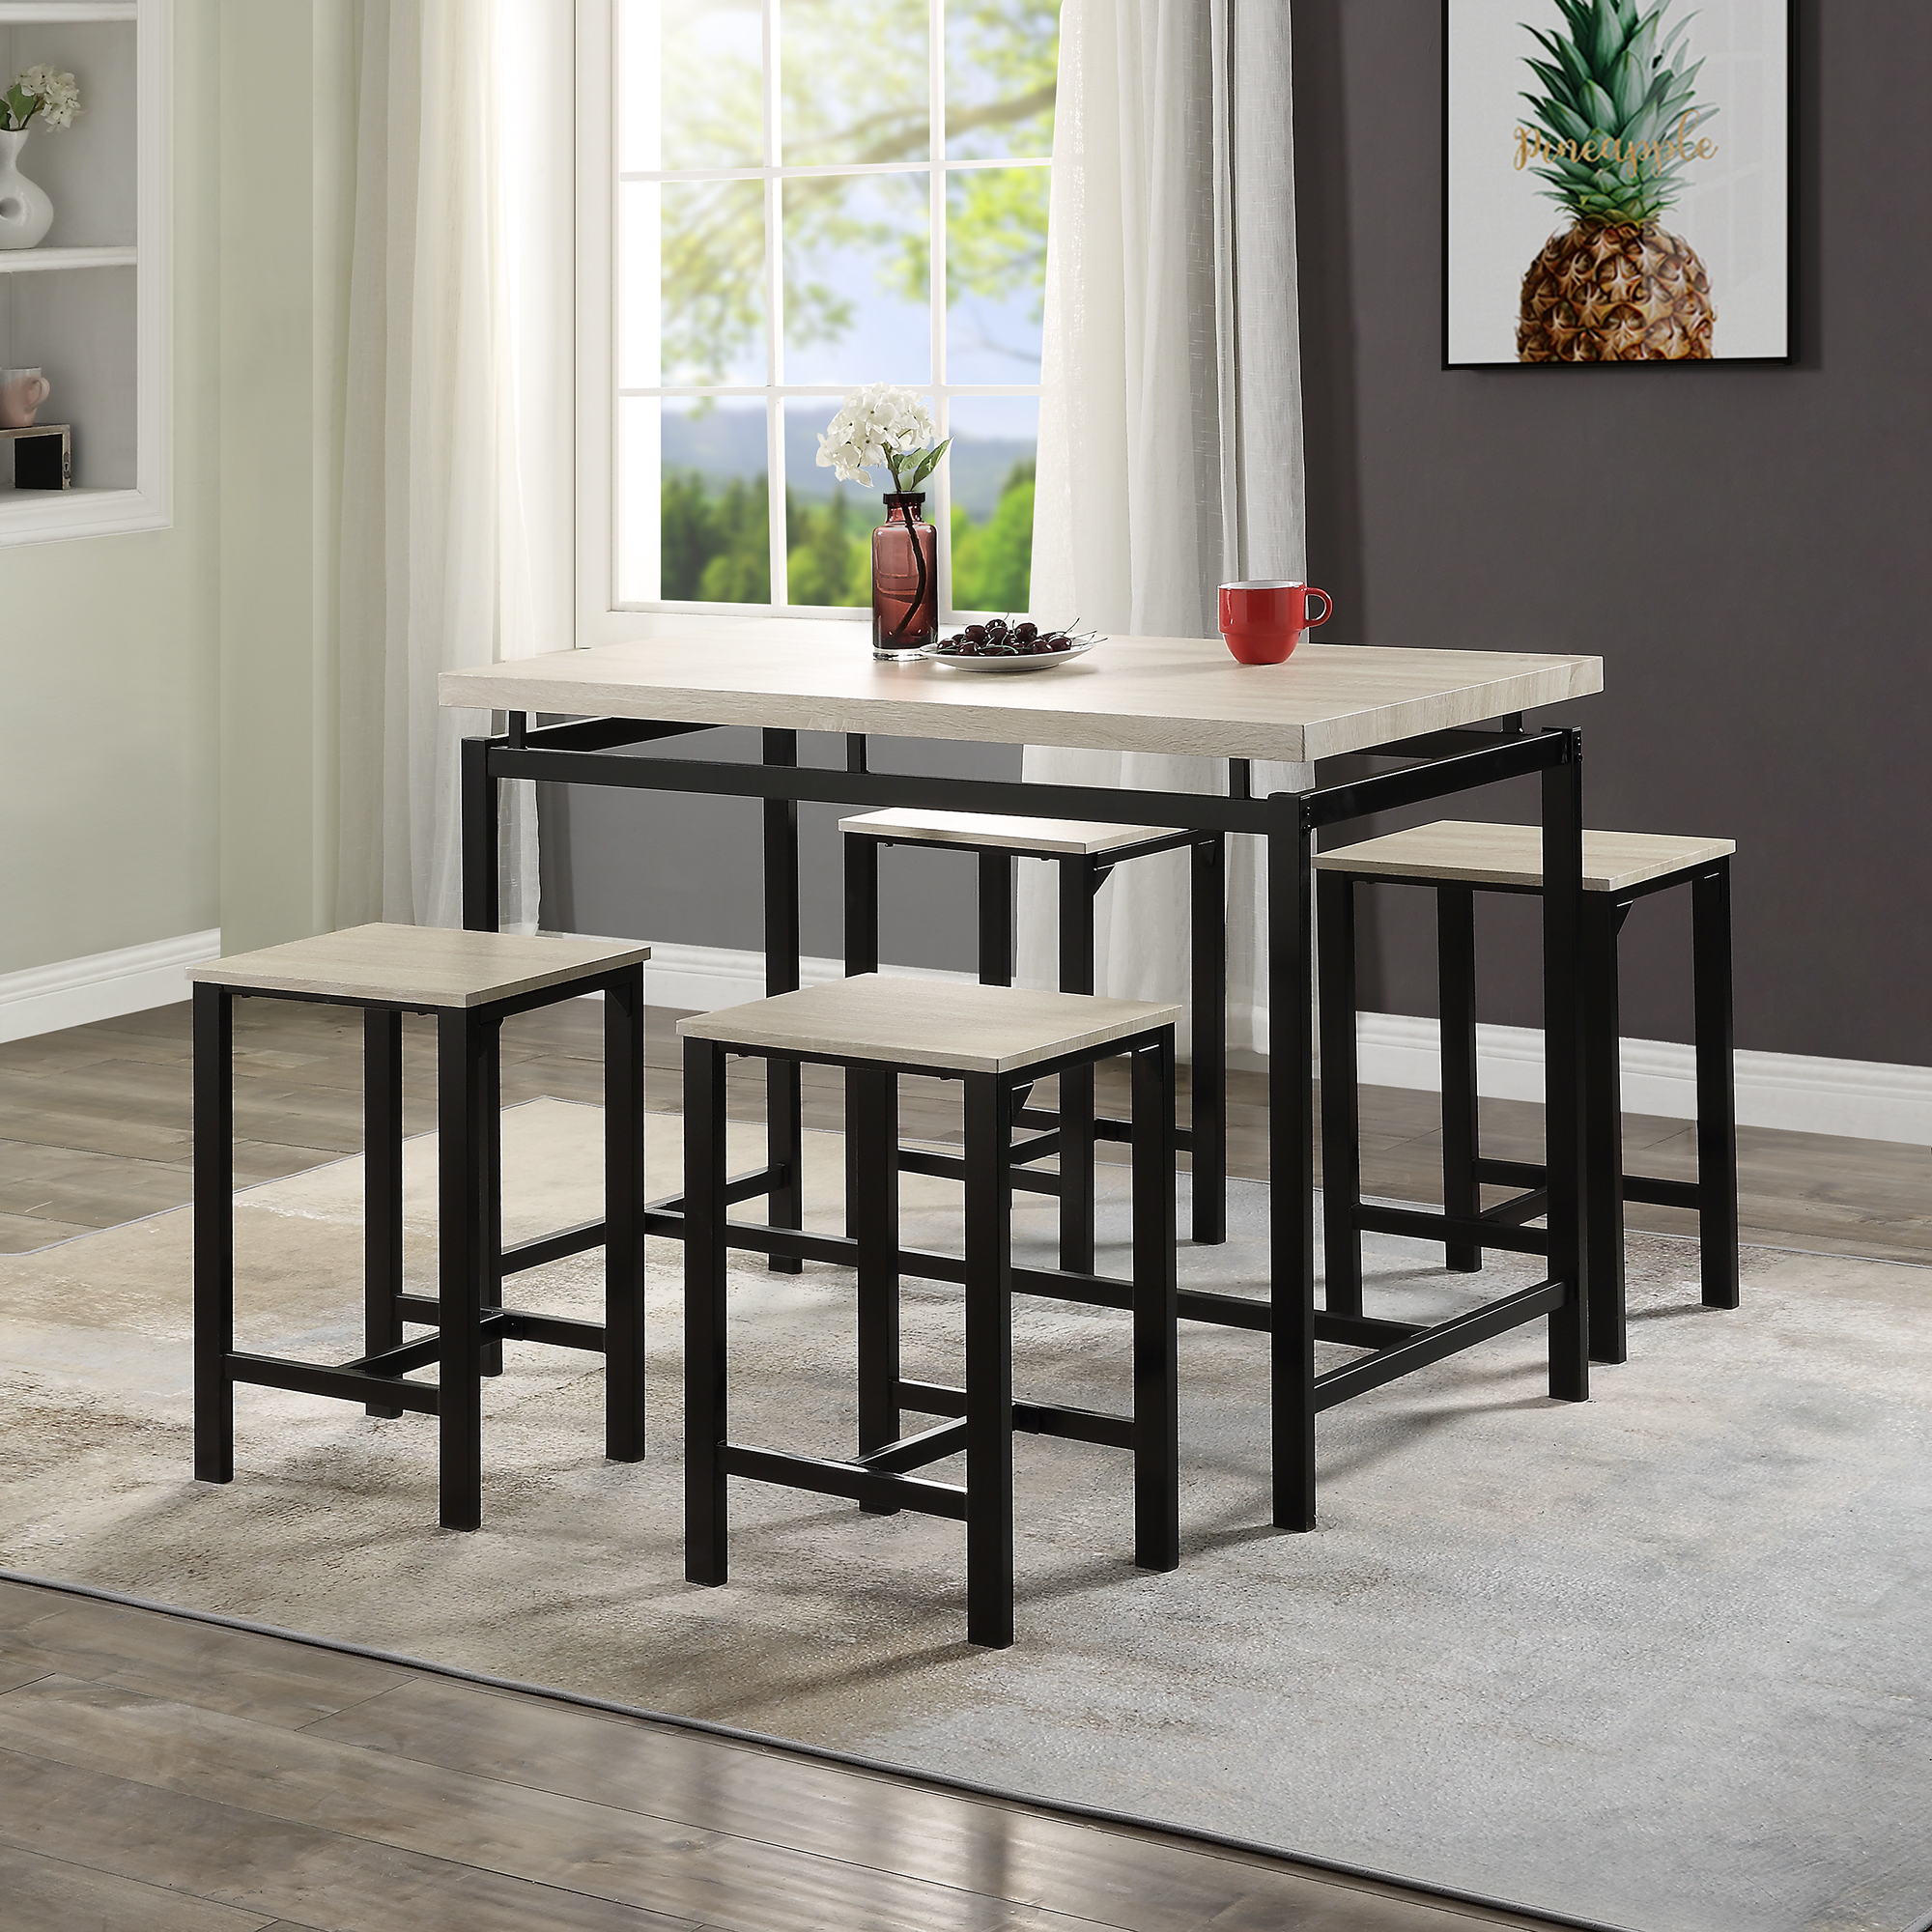 Dining Table with 4 Chairs,5 Piece Dining Set with Counter and Pub Height-Boyel Living